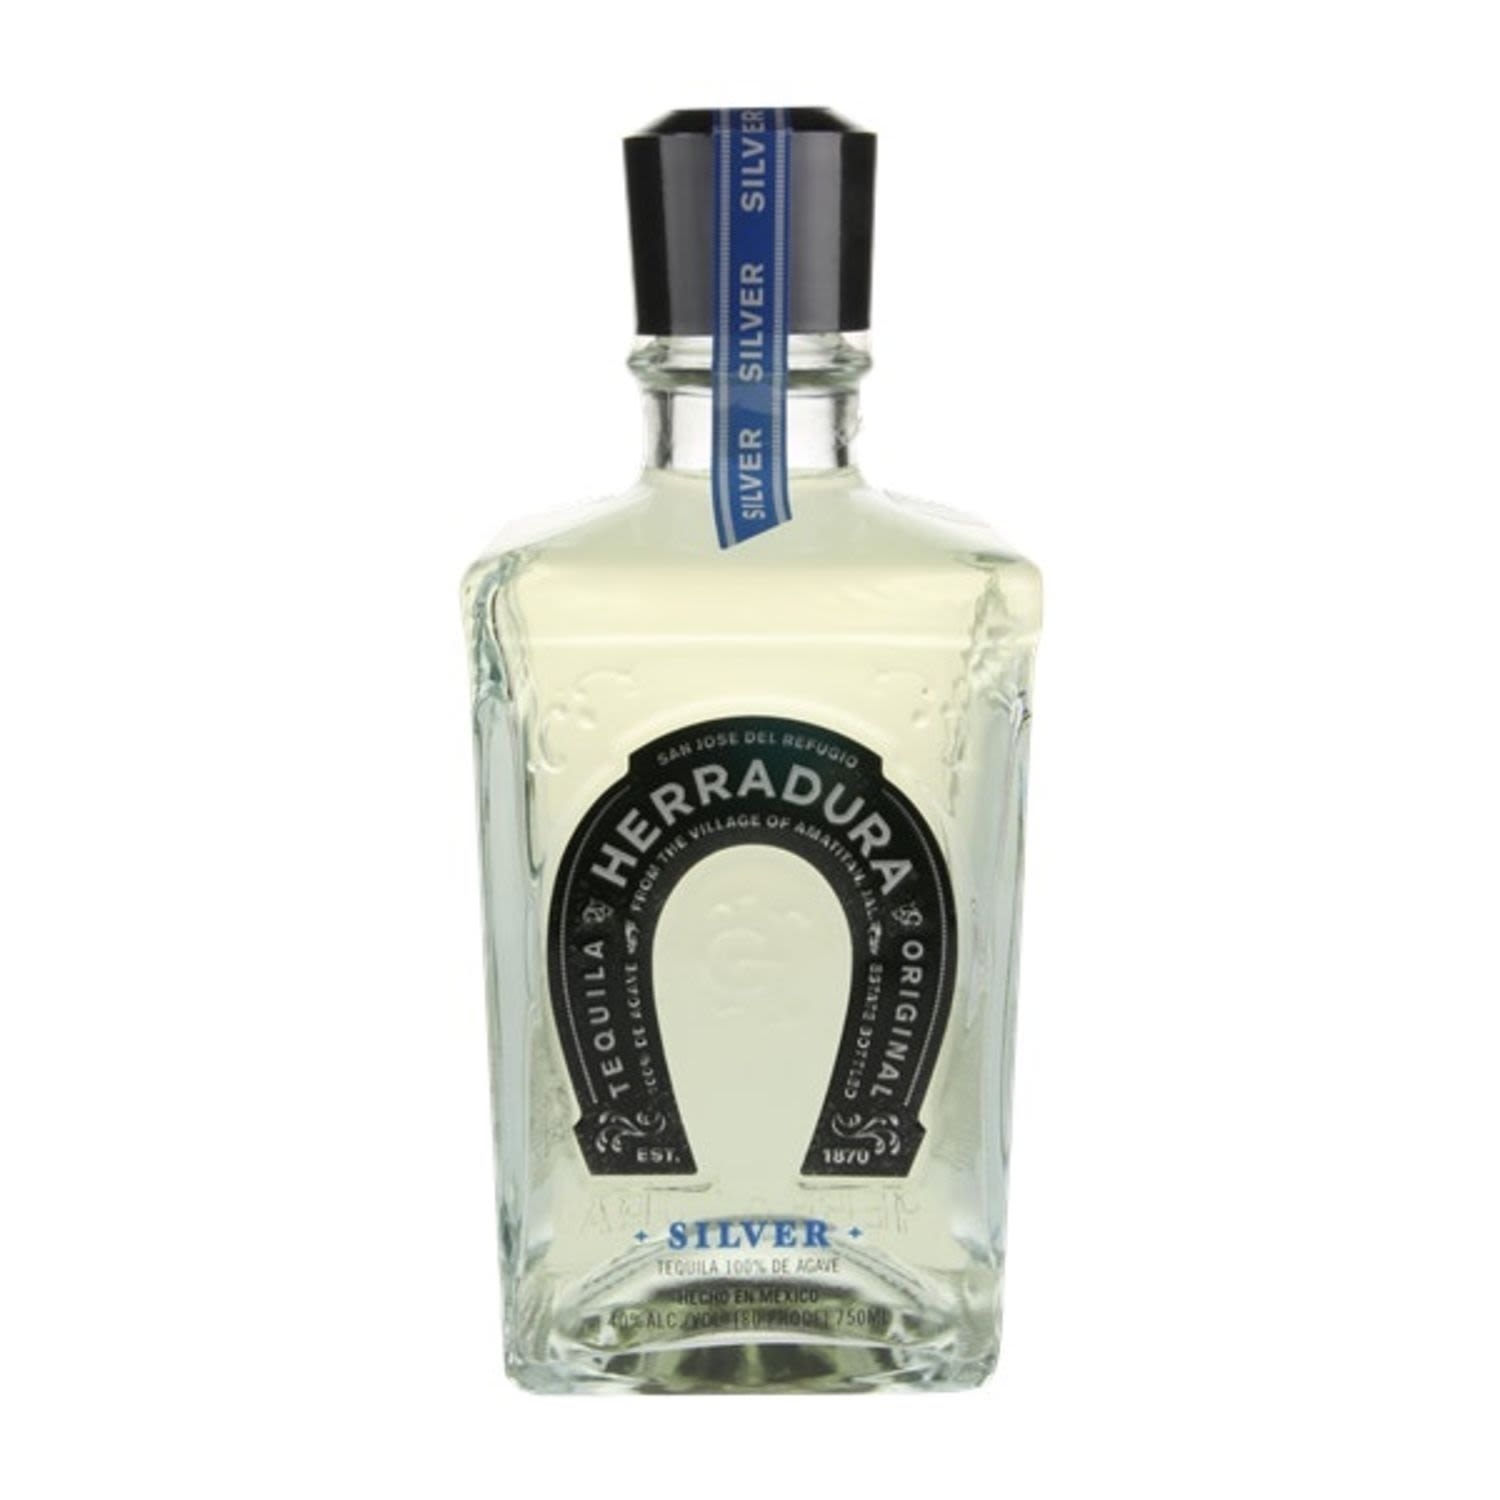 Herradura Silver owes its distinctly sweet taste of agave and subtle oak notes to resting for an impressive 45 days beyond the industry standard in American White Oak barrels. The prolonged aging process creates a light straw color with a unique, robust aroma of cooked agave, vanilla and wood that leaves your mouth feeling smooth and refreshed.<br /> <br />Alcohol Volume: 40.00%<br /><br />Pack Format: Bottle<br /><br />Standard Drinks: 22.1</br /><br />Pack Type: Bottle<br />